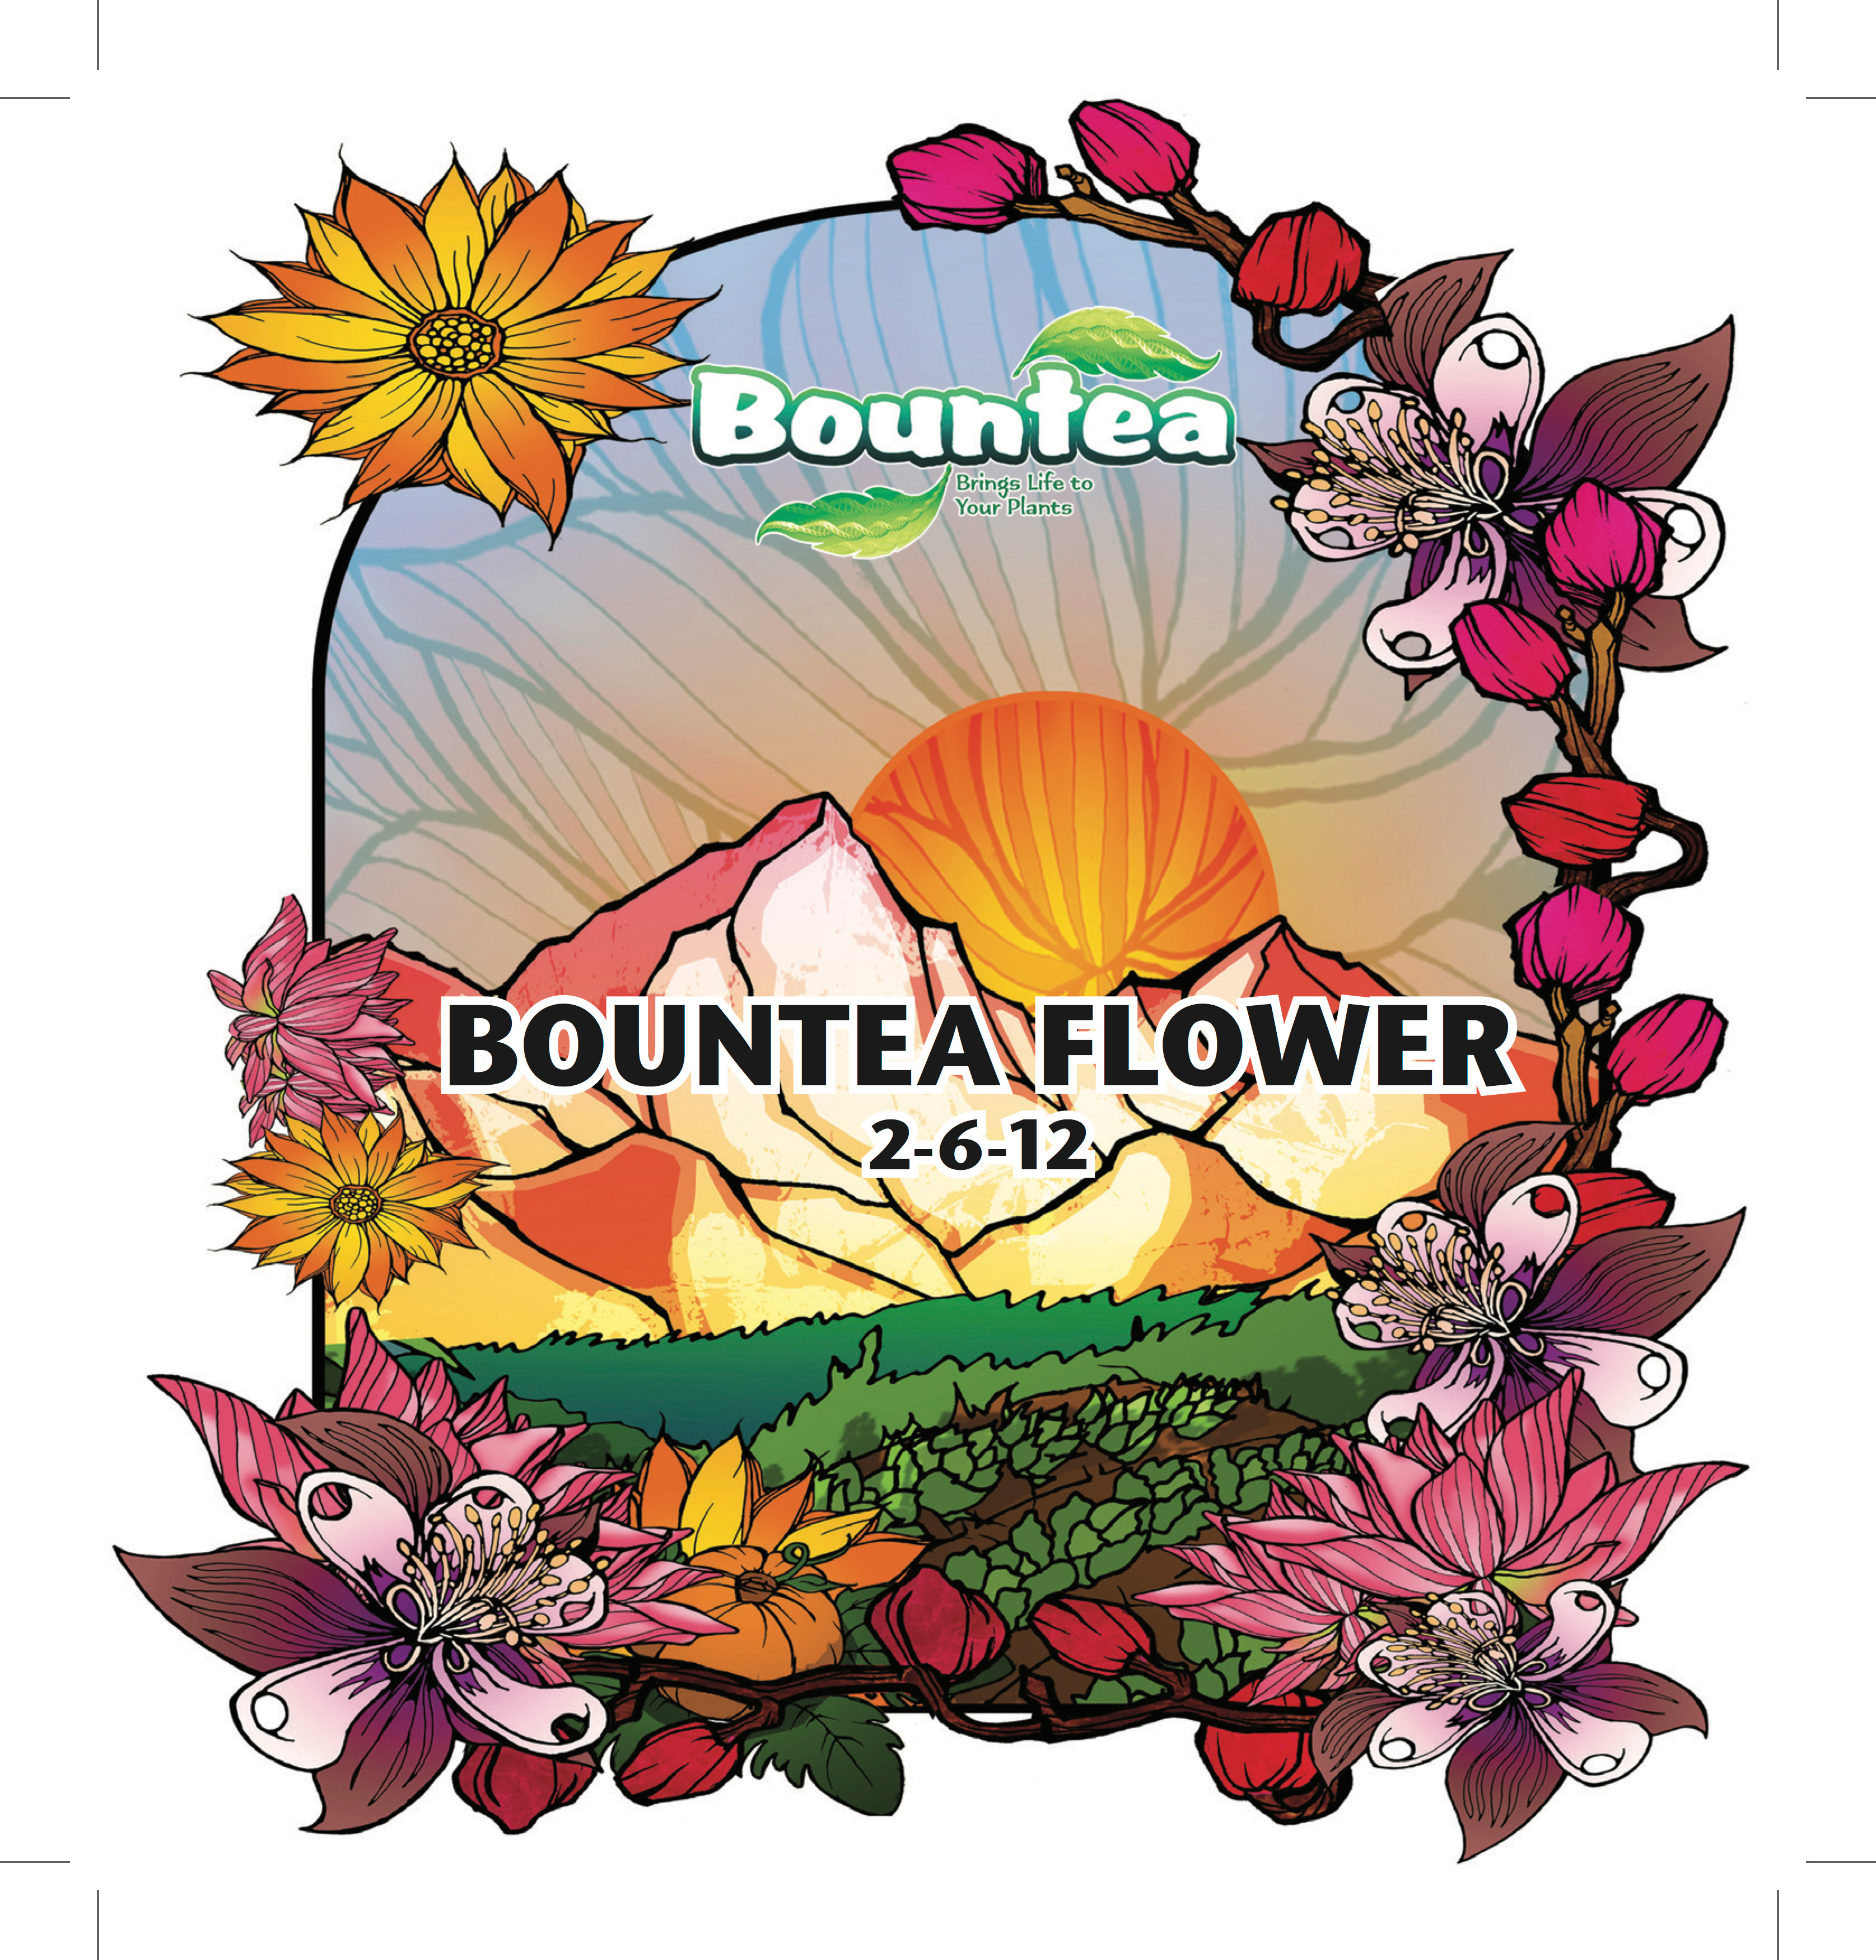 Picture for Bountea Flower, 5 gal